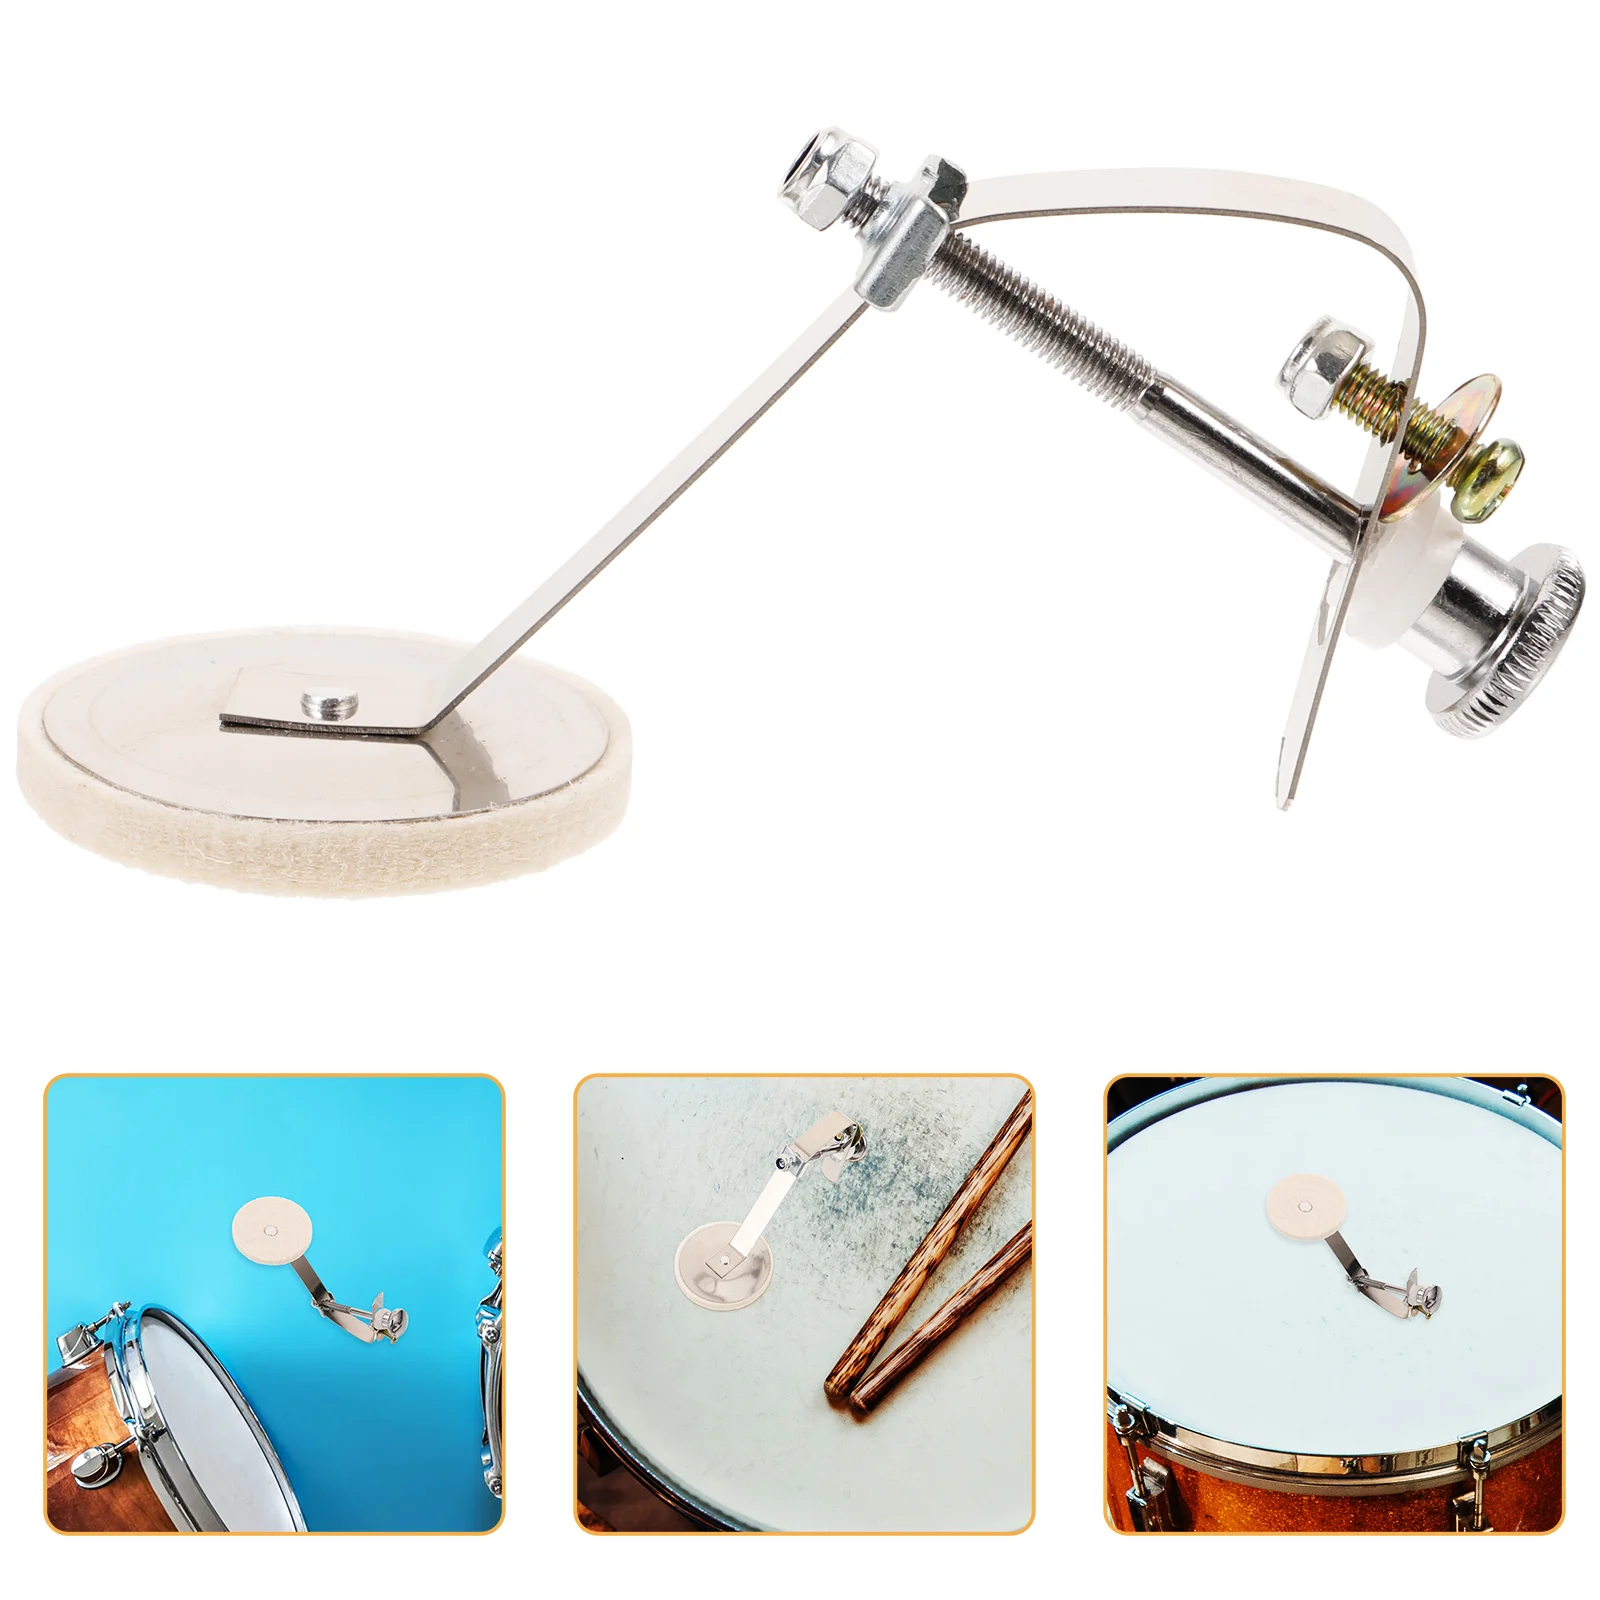 

Snare Drum Damper Professional Drum Mute Silencer Dampener Pad Percussion Replacement Instrument Accessories Parts